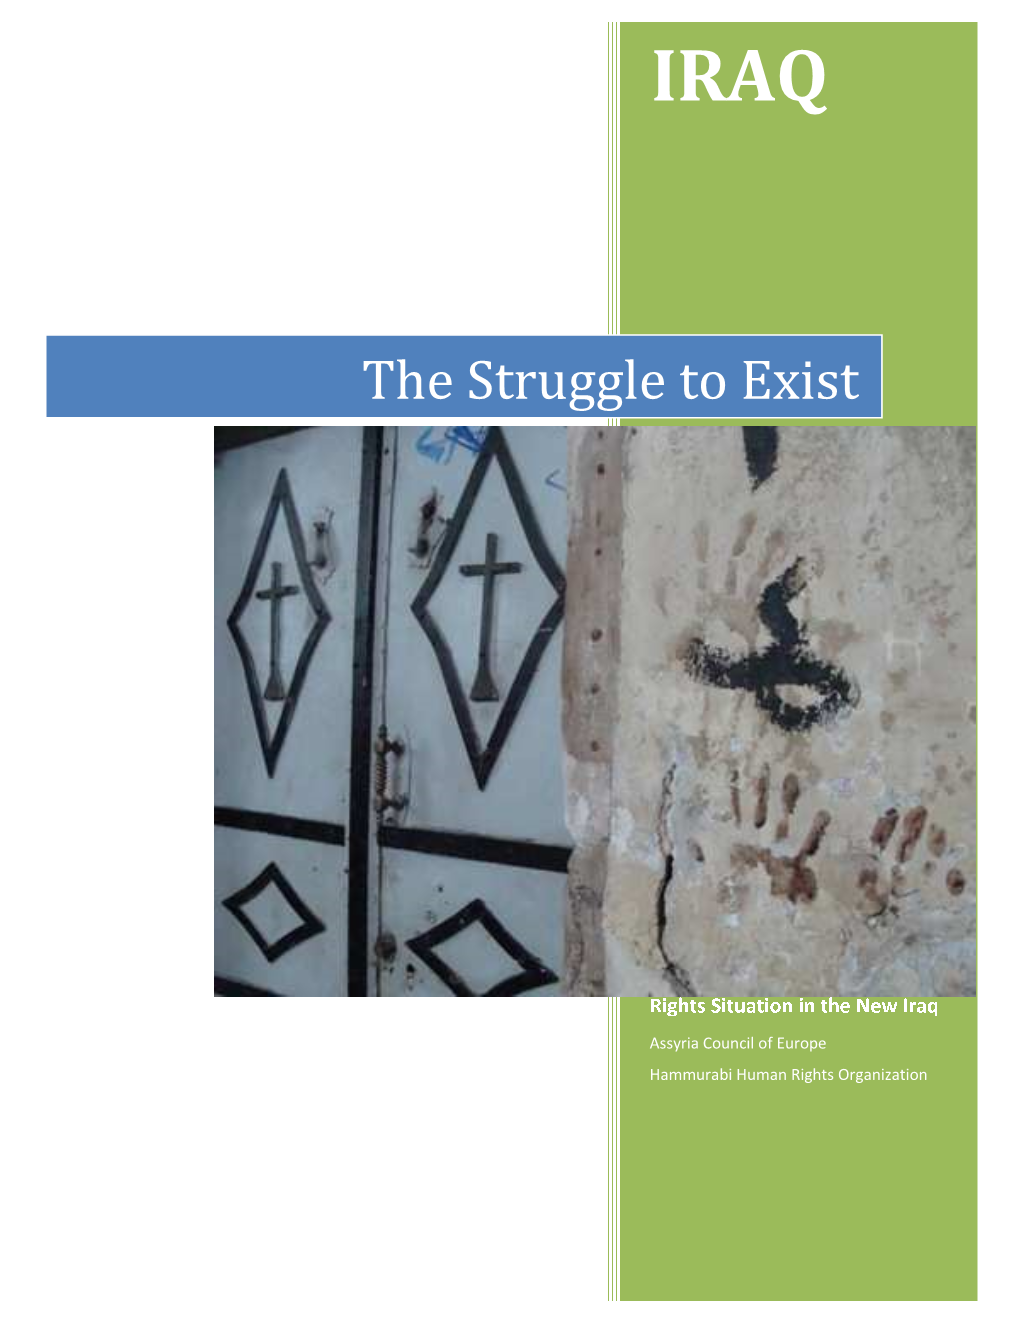 The Struggle to Exist: a Human Rights Report Concerning Assyrian Christians in Iraq